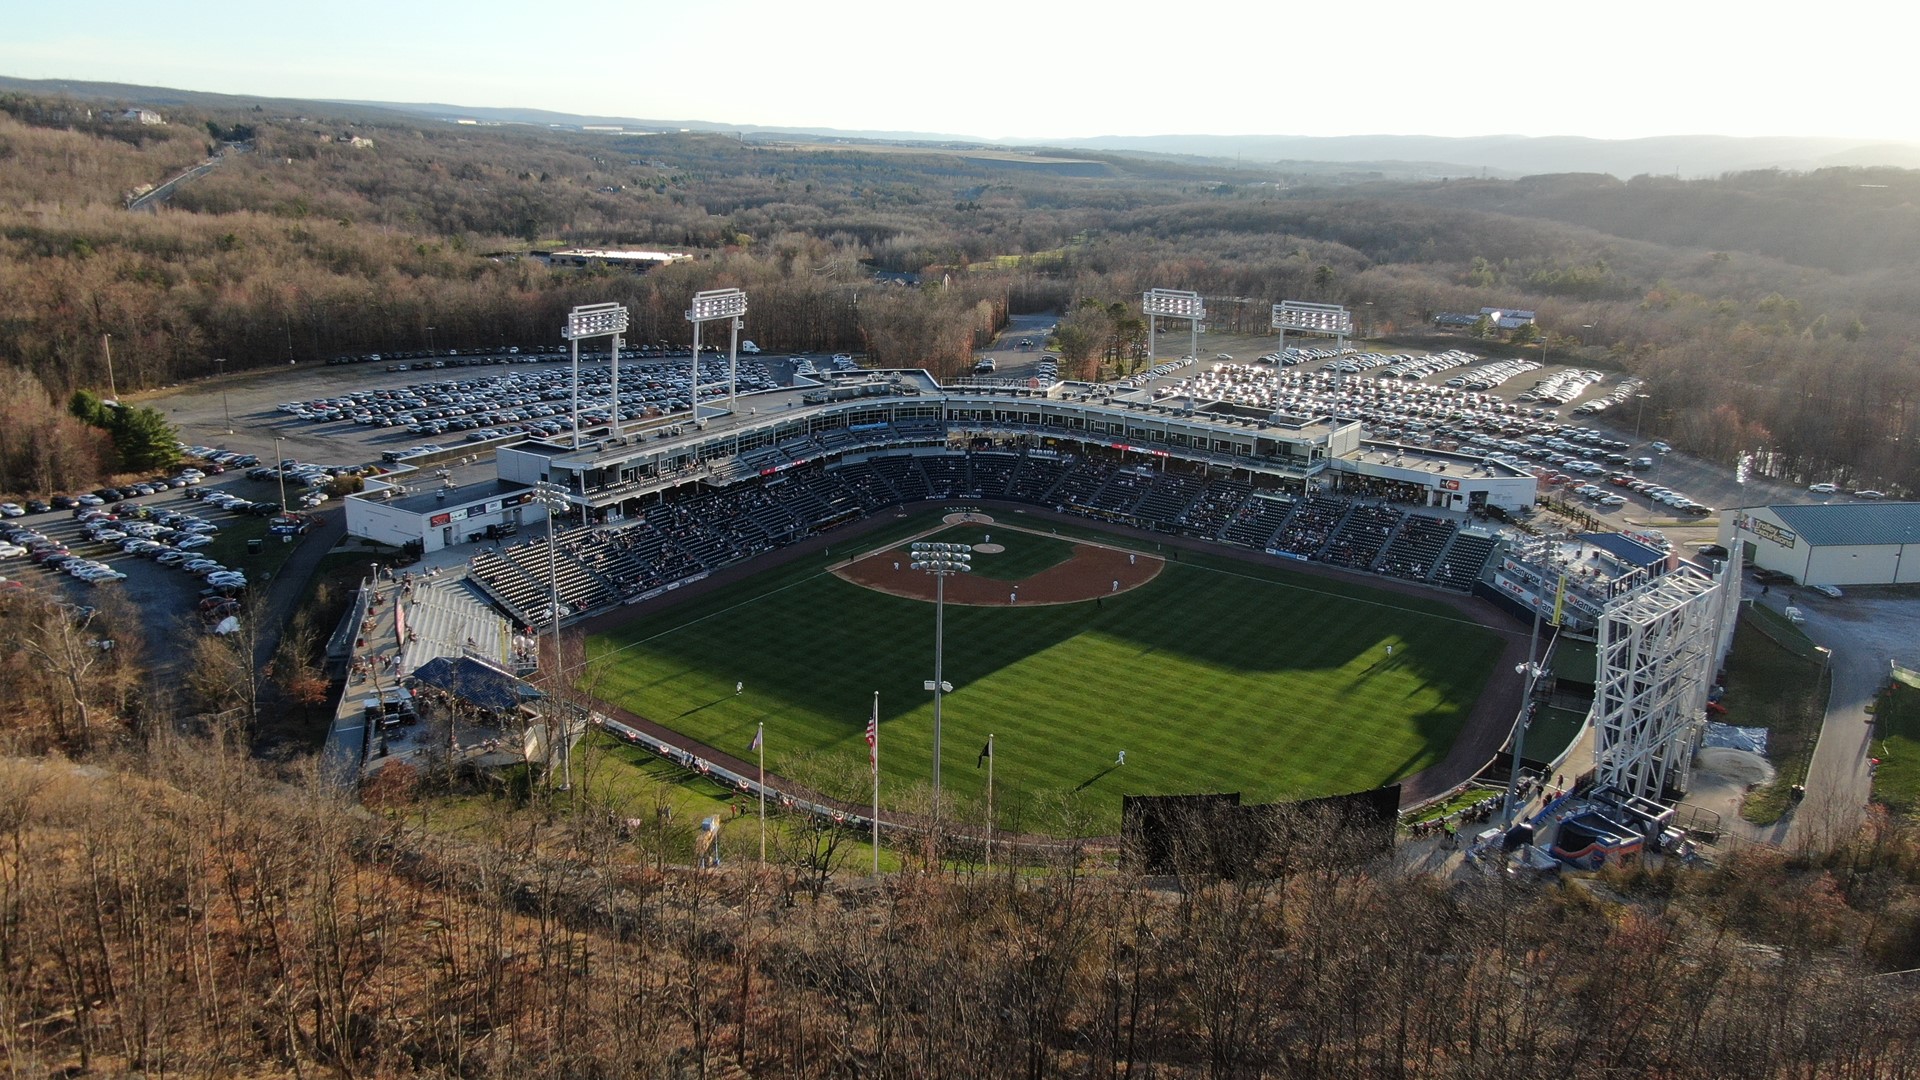 RailRiders fans excited for home opener